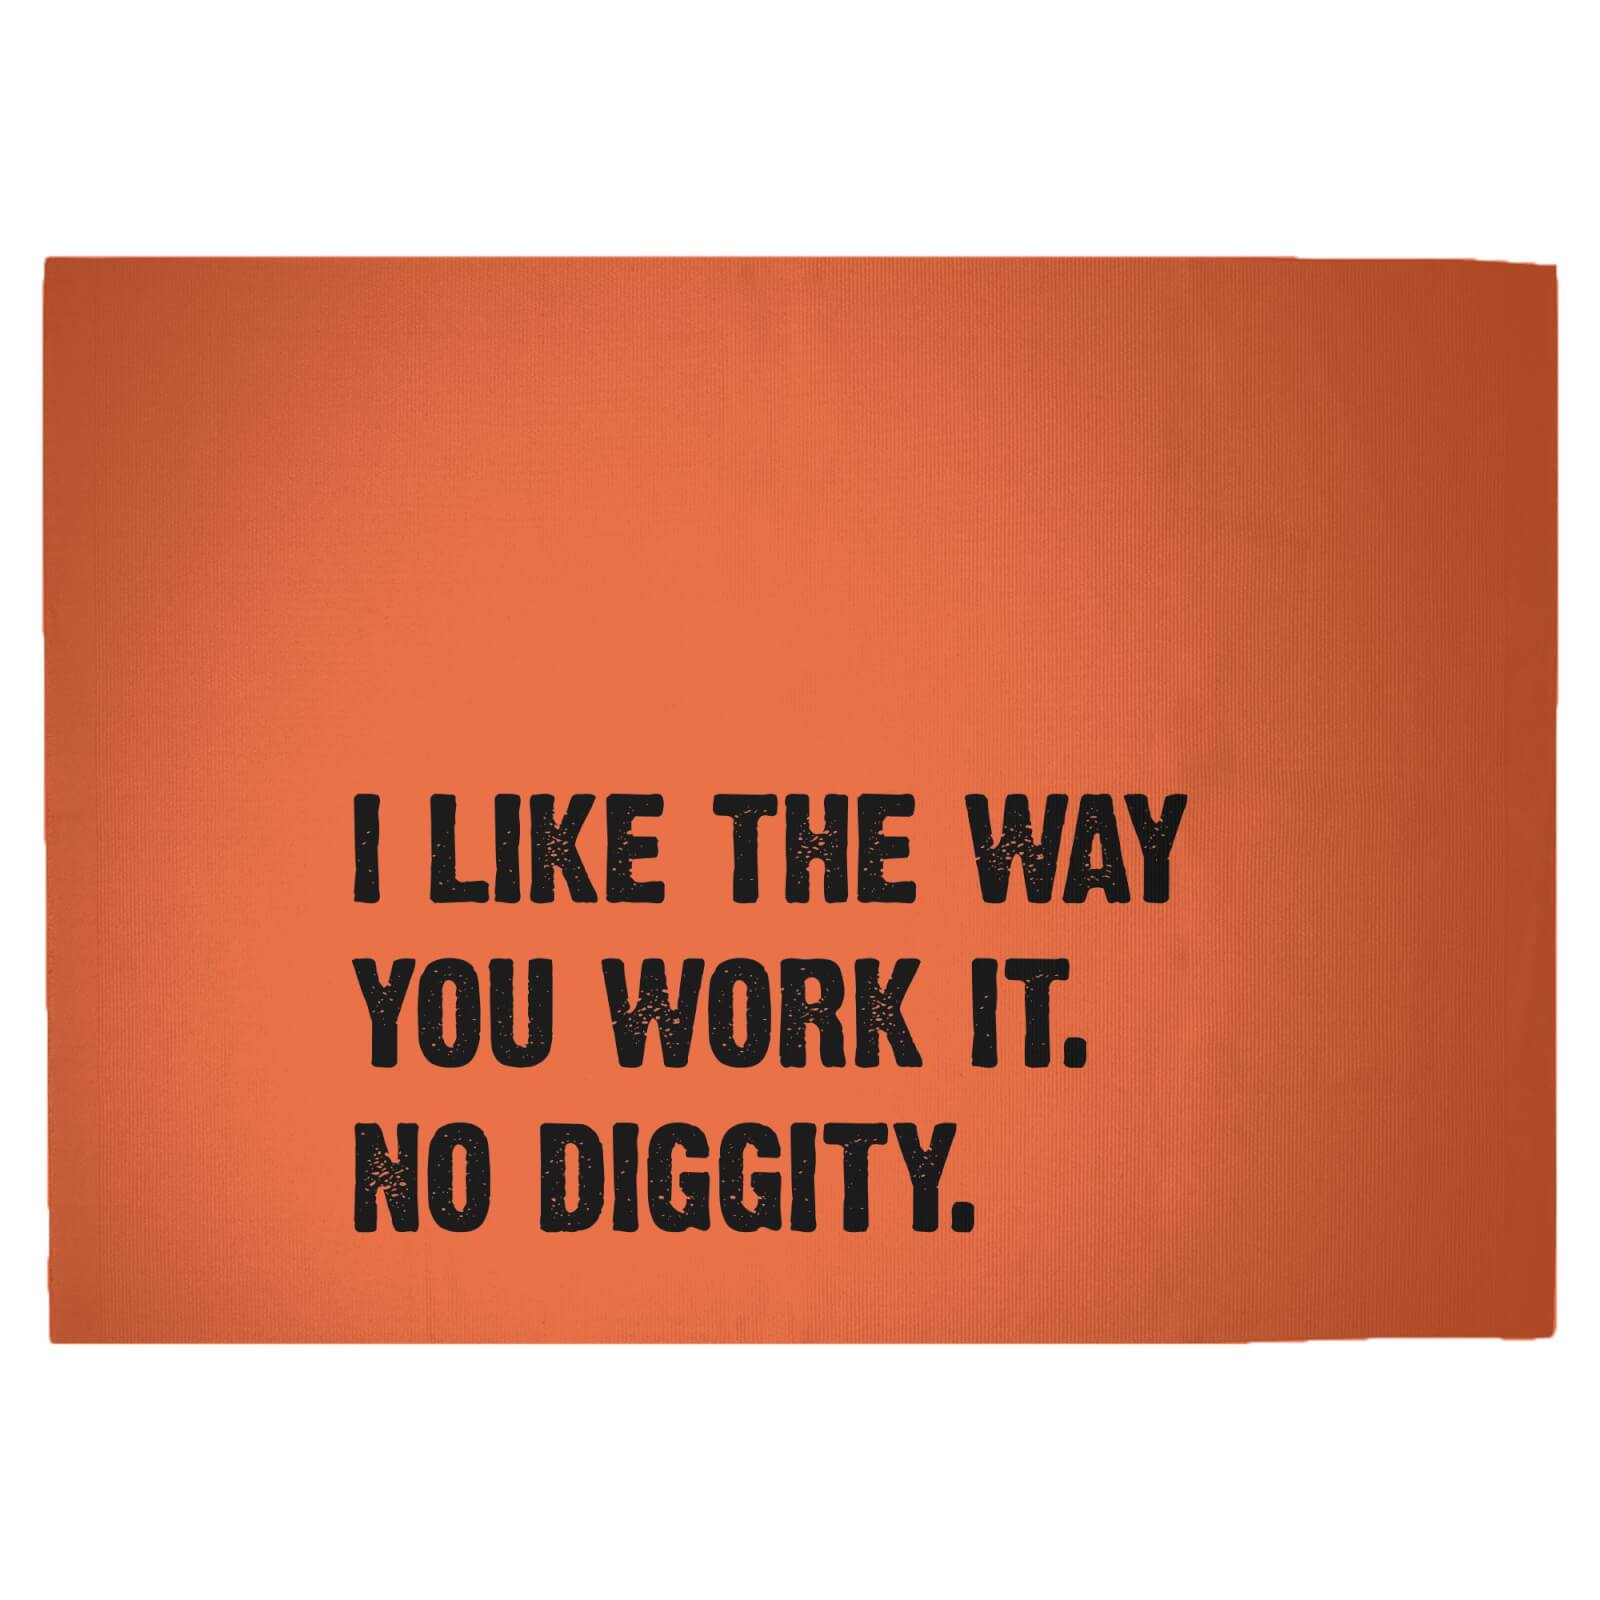 I Like The Way You Work It. No Diggity. Woven Rug - Large